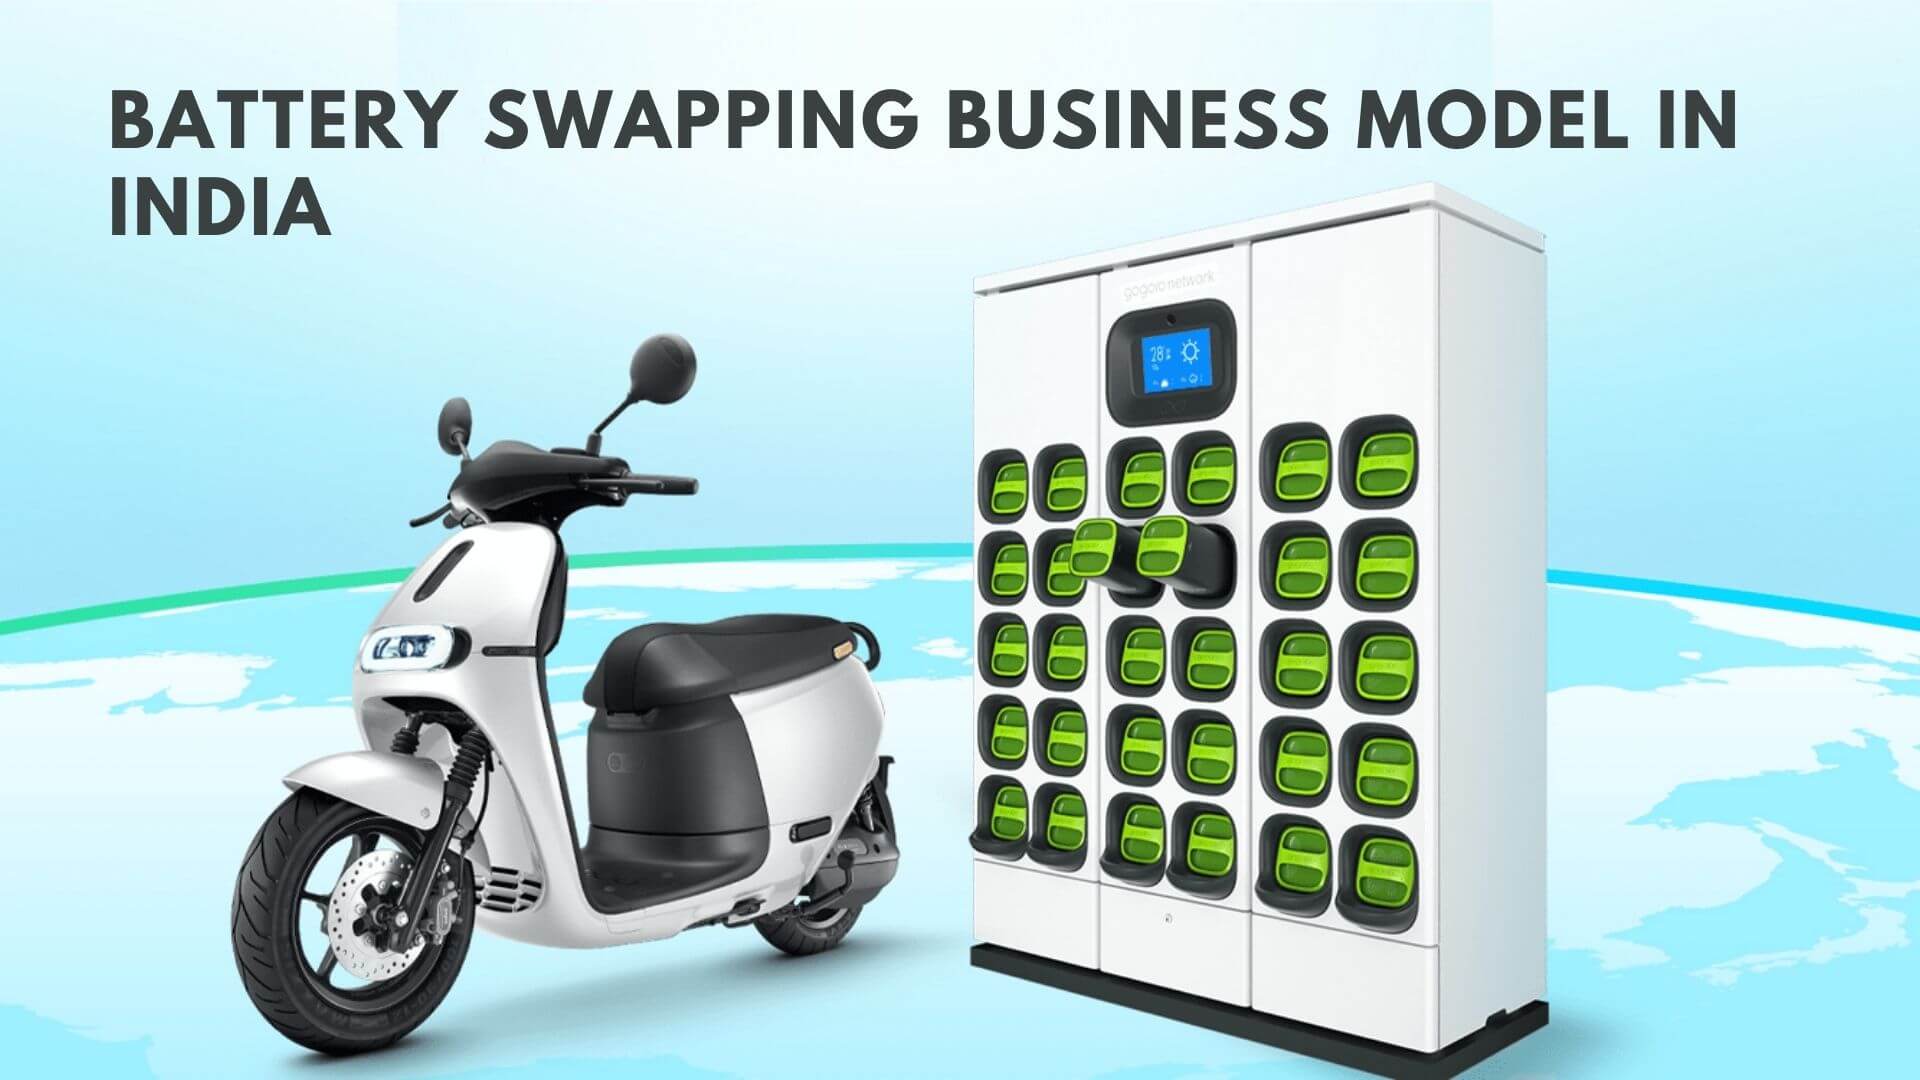 https://e-vehicleinfo.com/battery-swapping-business-model-in-india/